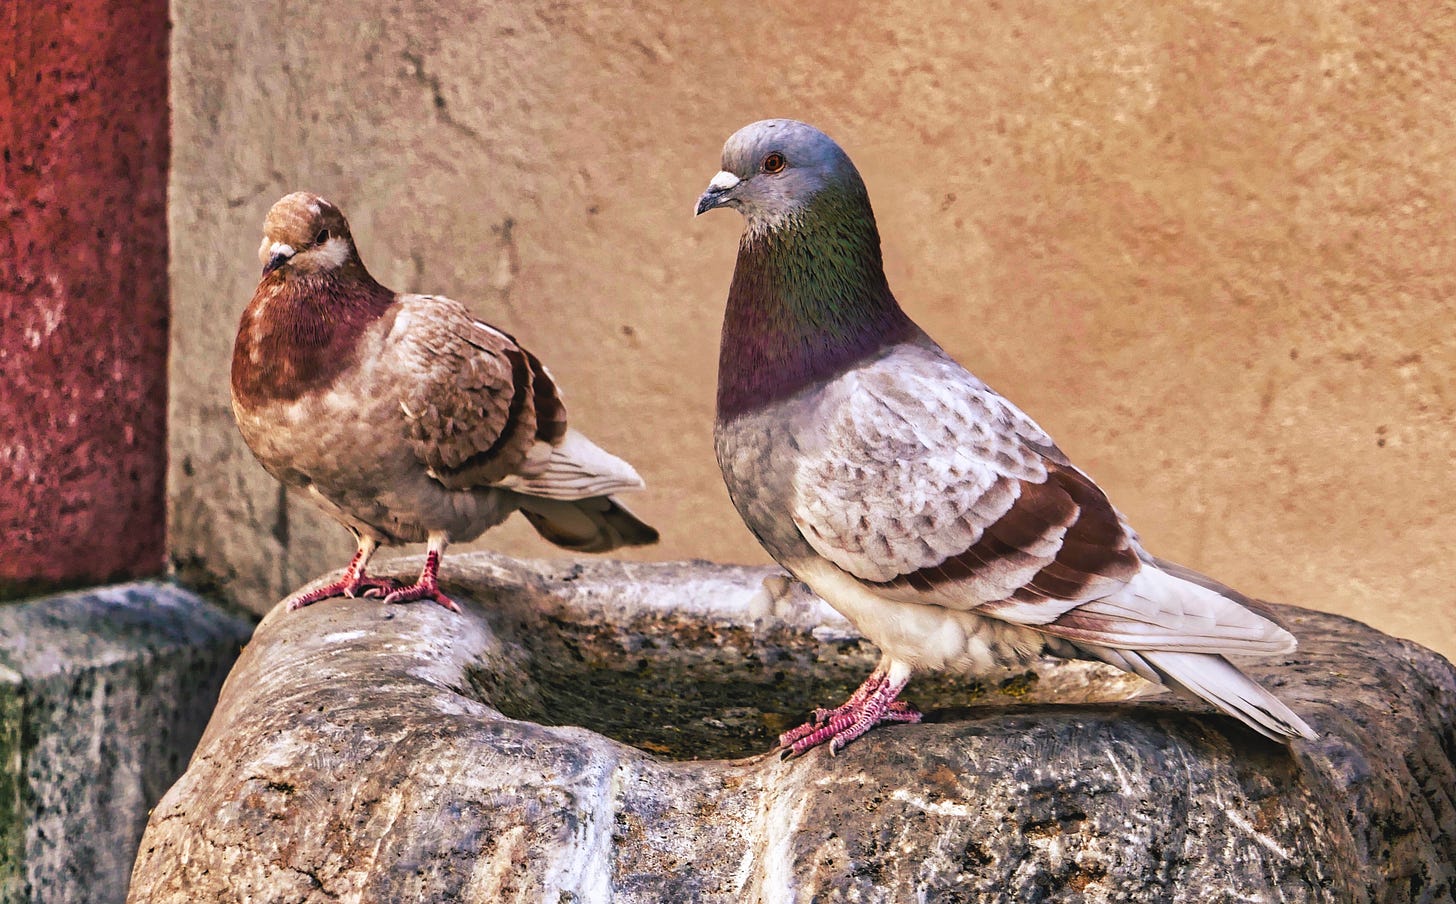 Two pigeons sitting on a stone, one with a grey, green, and purple feathers on the right and the other with lights and dark brown feathers on the left